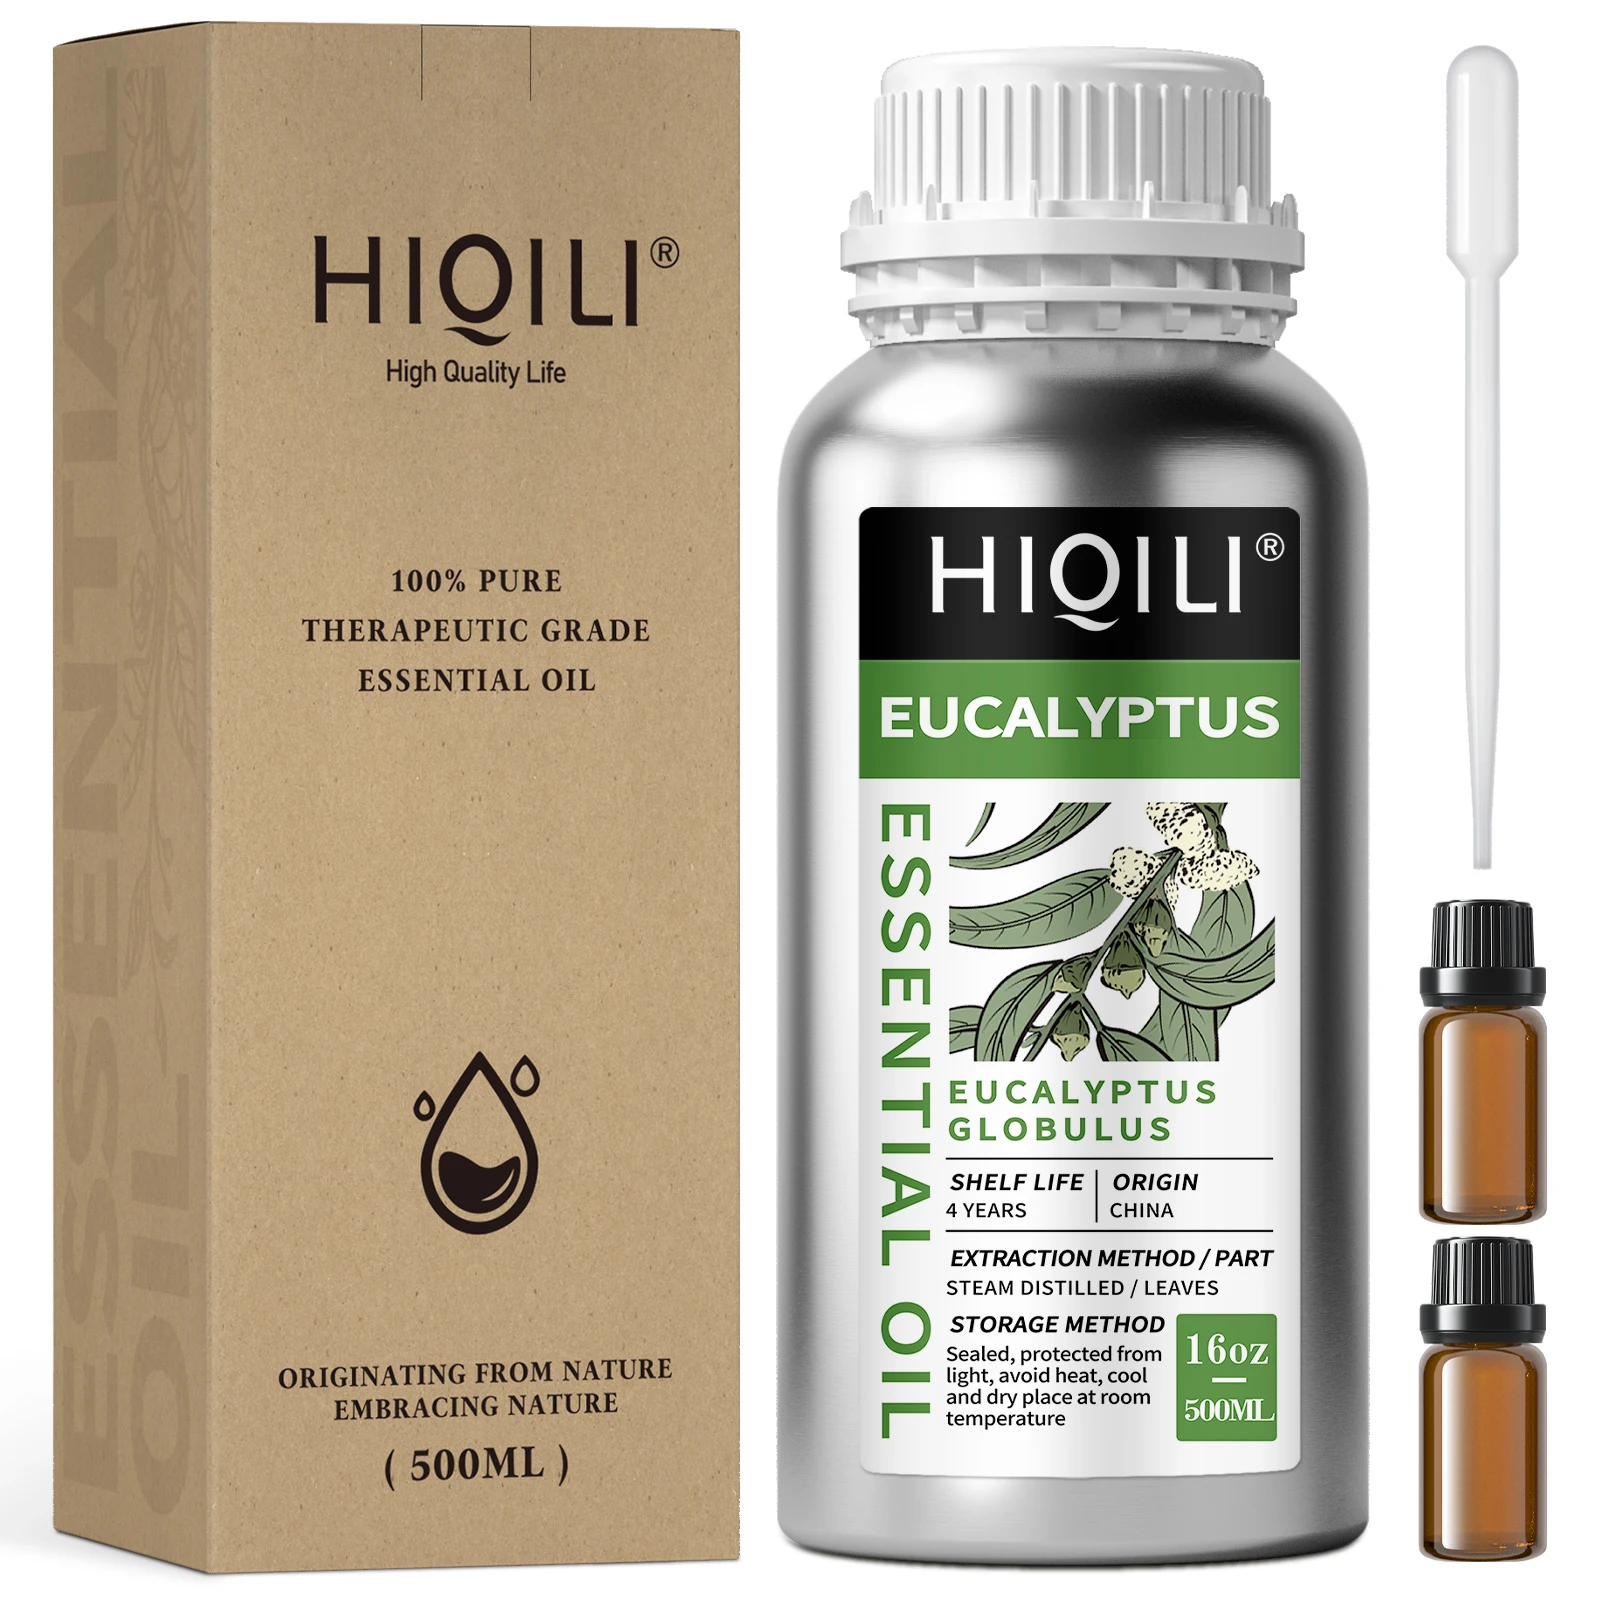 HIQILI 500ML Eucalyptus Essential Oils, 100% Pure Nature for Aromatherapy Used for Diffuser, Humidifier, Massage | Prevent Colds kinscoter electric aroma diffuser air humidifier 500ml ultrasonic cool mist maker fogger high quality led essential oil diffuser